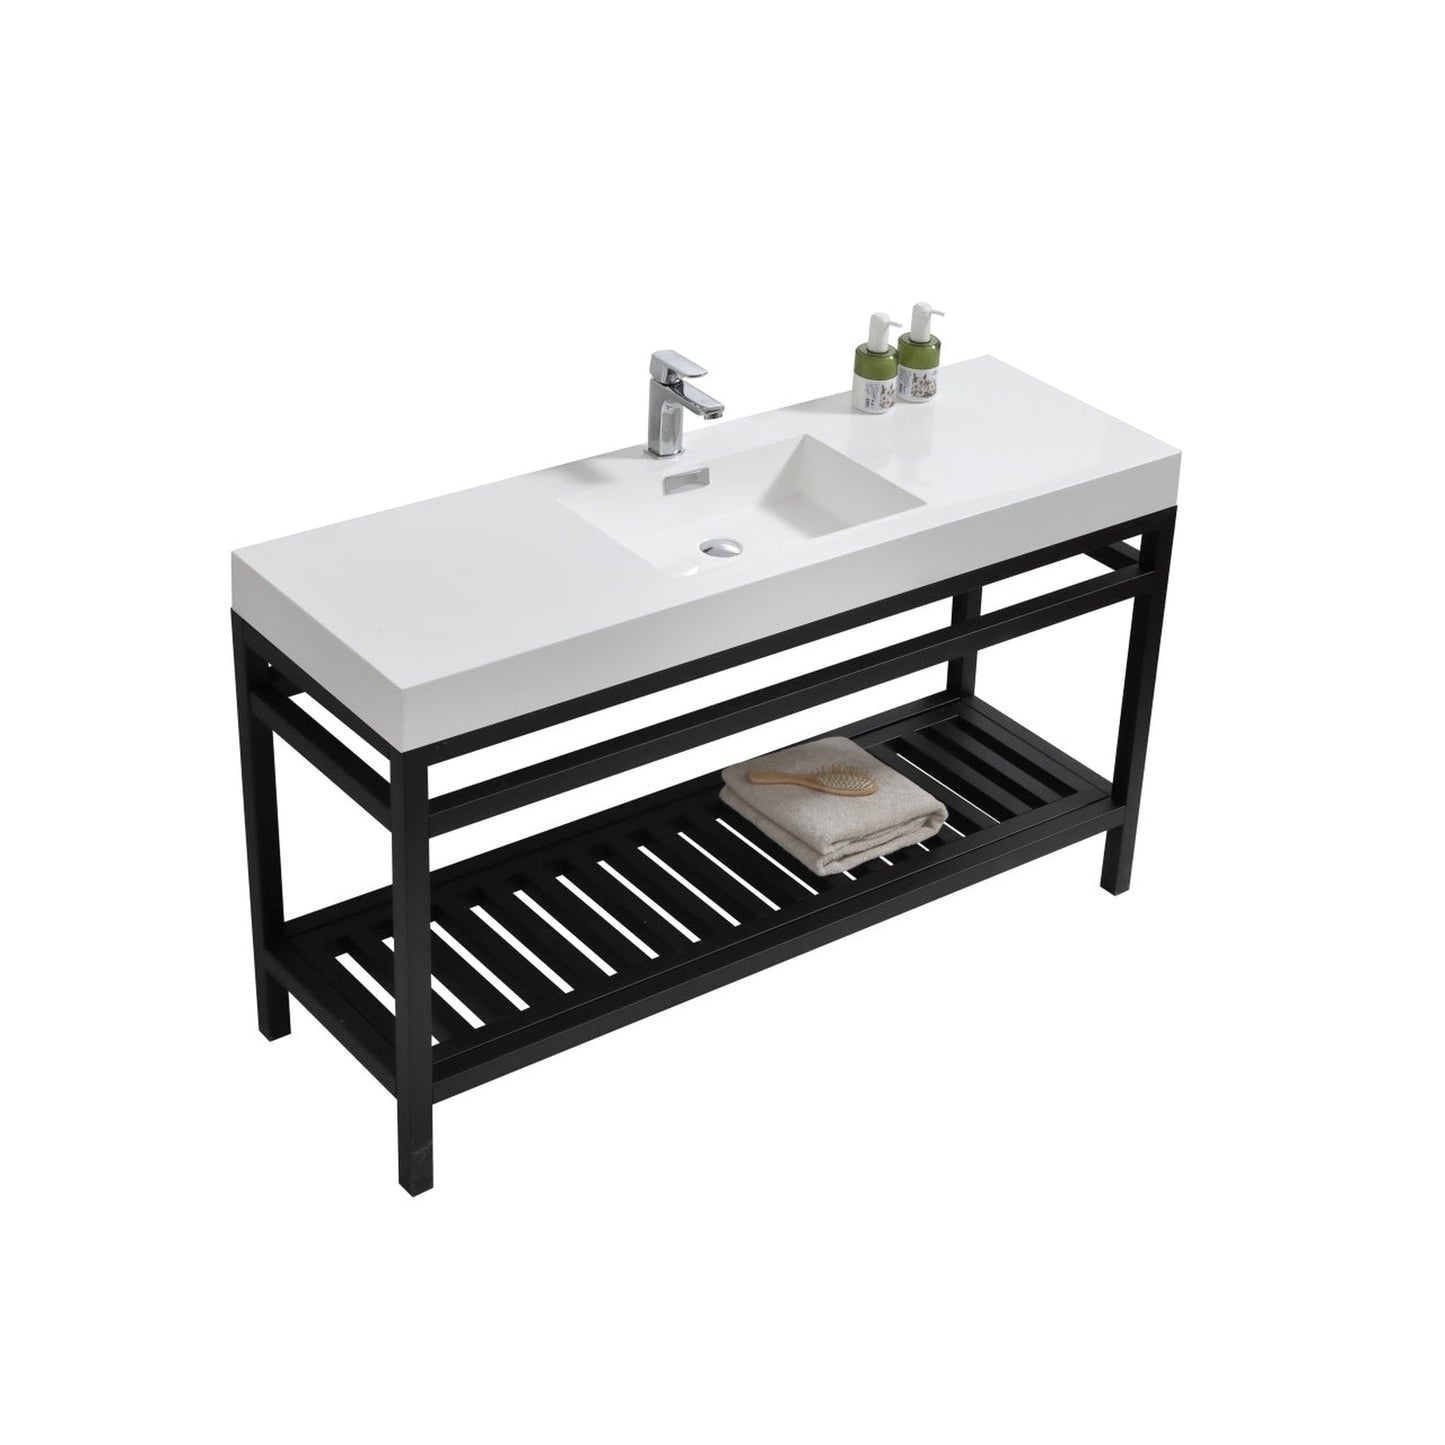 KubeBath Cisco 60" Stainless Steel Matte Black Console Freestanding Modern Bathroom Vanity With Single Integrated Acrylic Sink With Overflow and 55" Black Framed Mirror